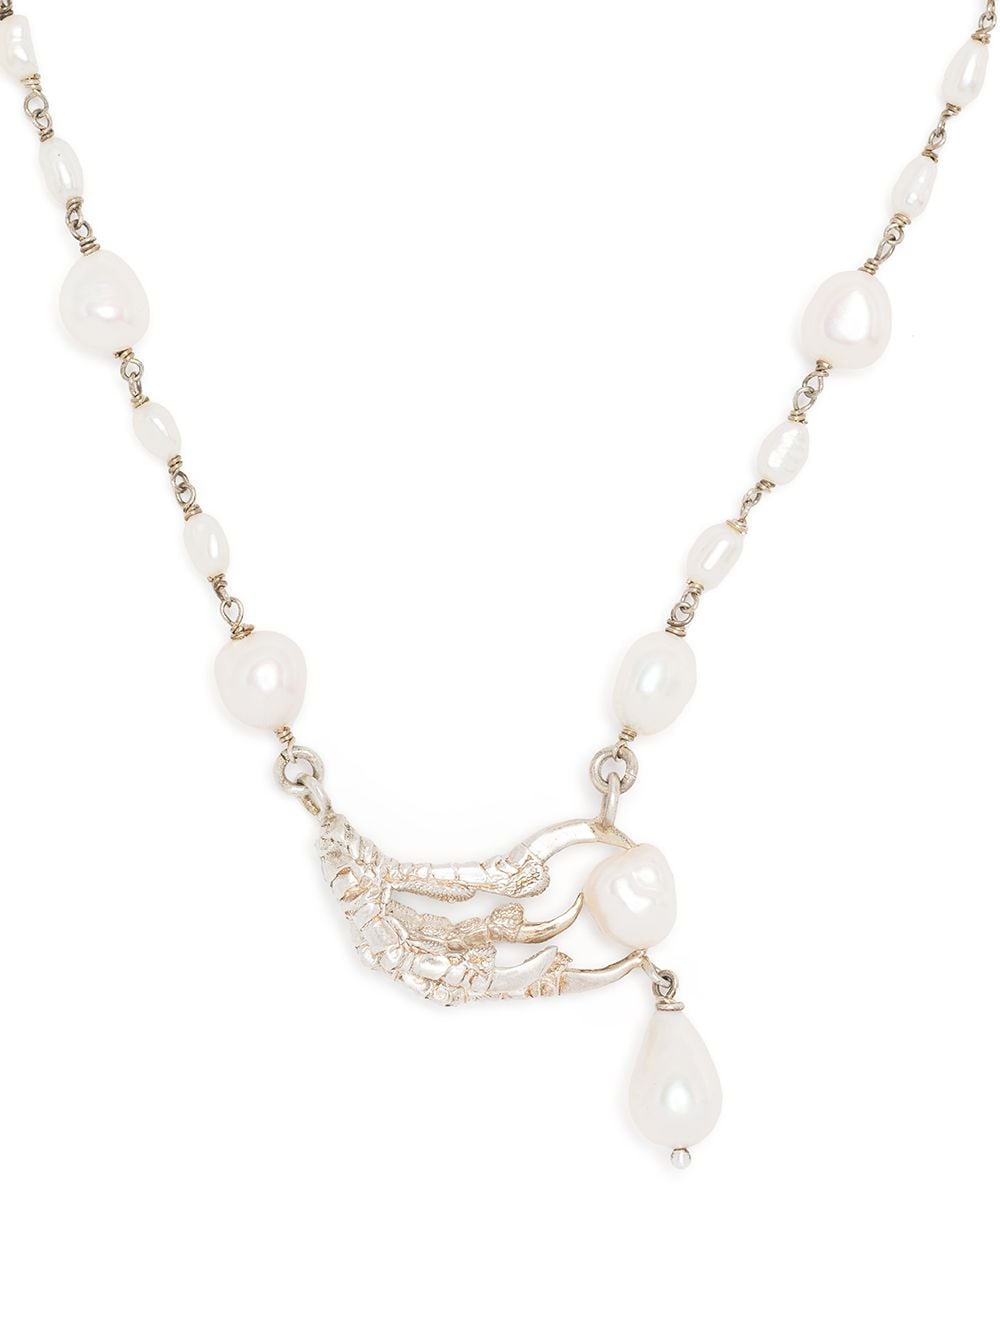 Claire English Magpie pearl necklace